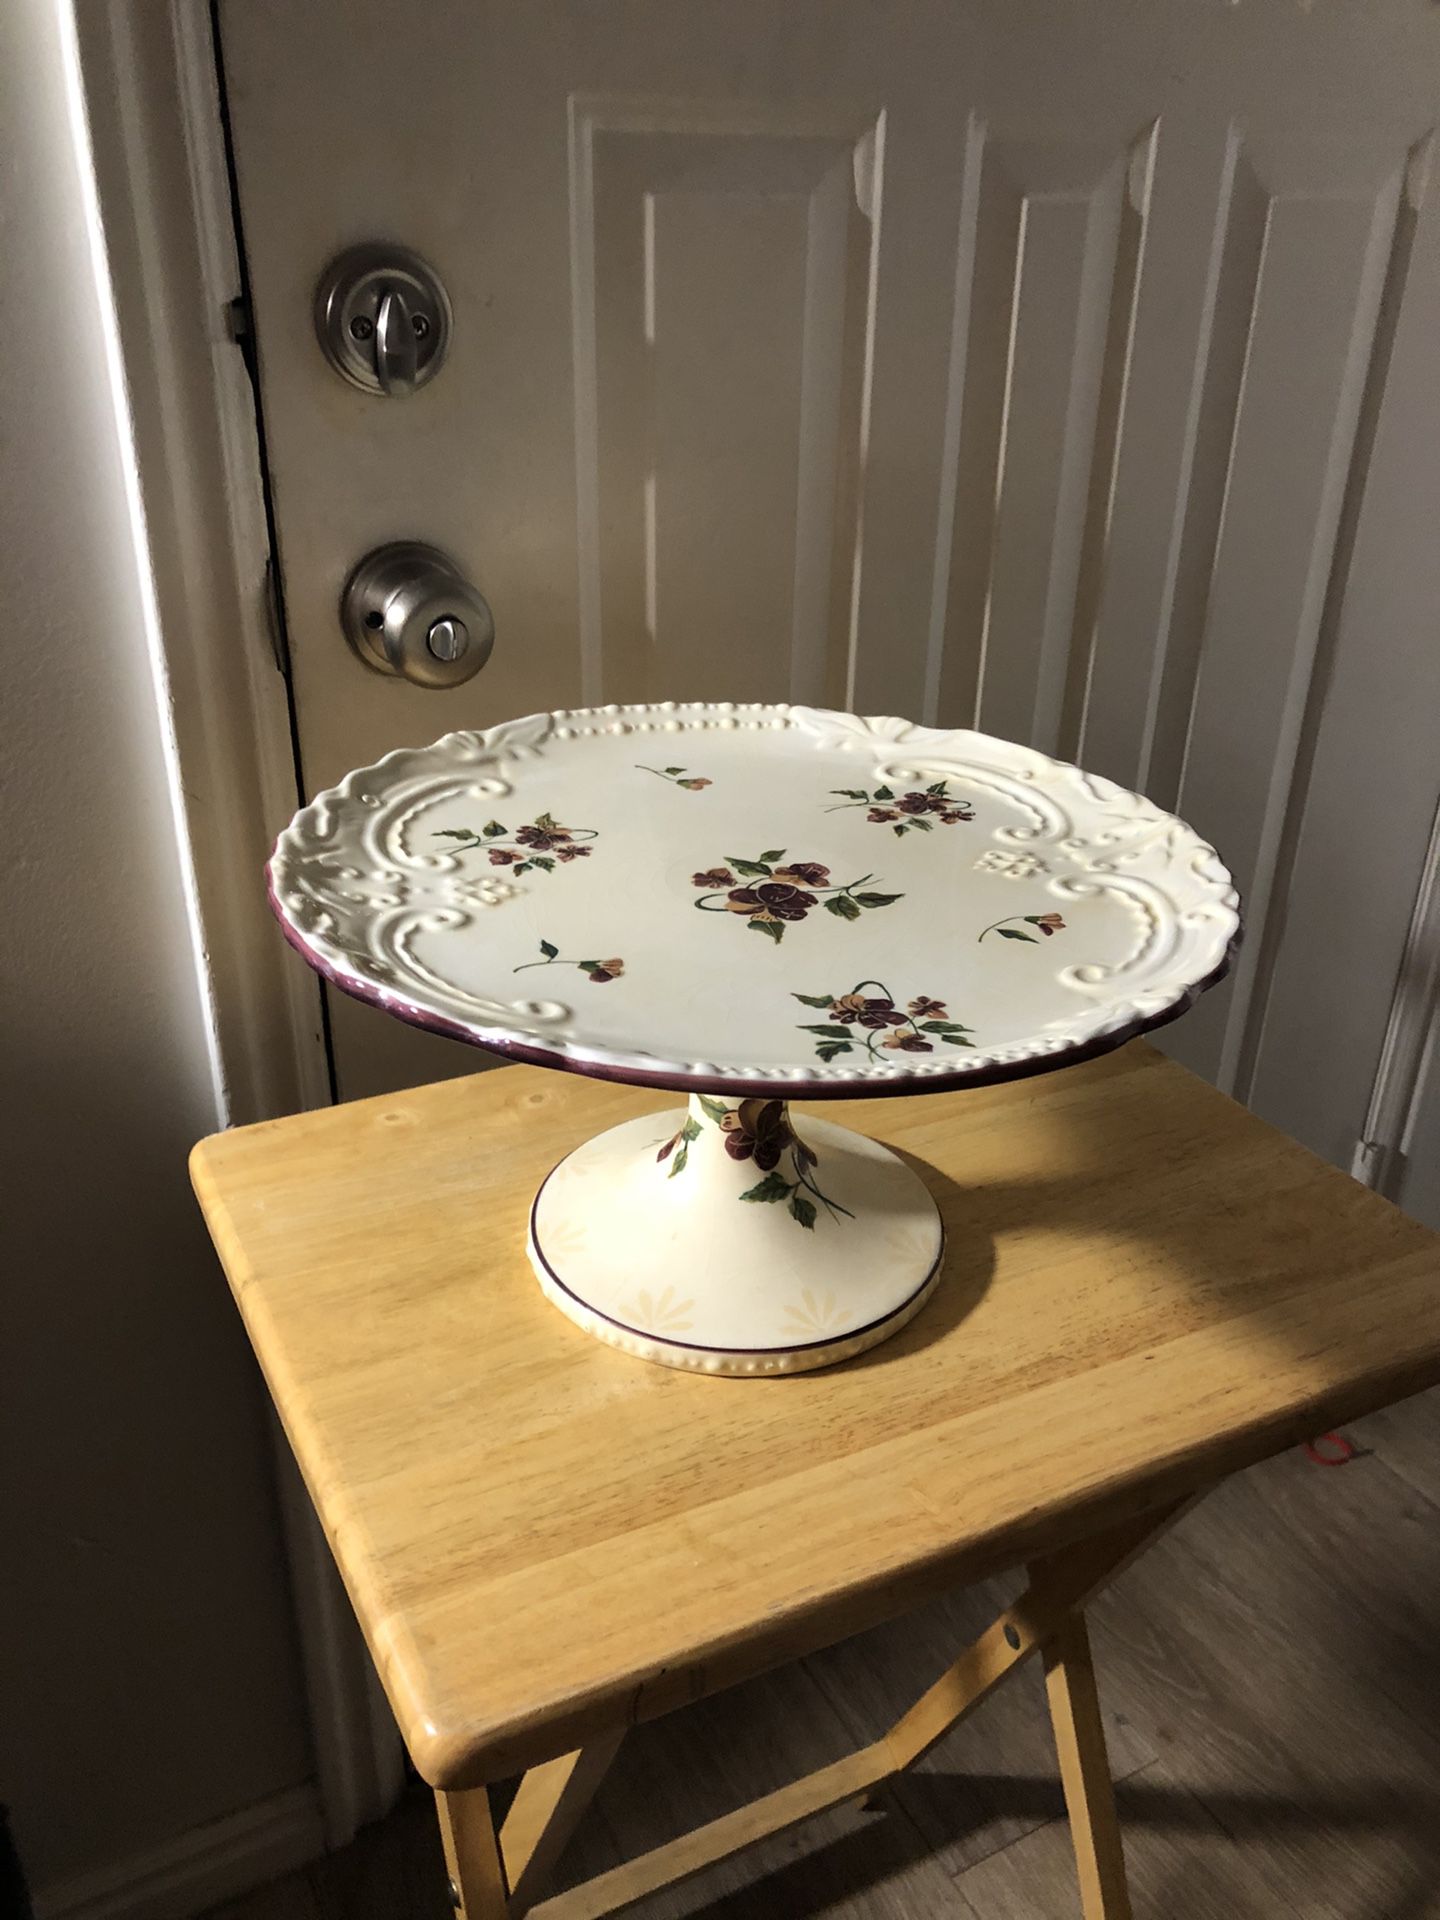 AMAZING VINTAGE HAND PAINTED CAPRIWARE FINE CHINA CAKE STAND!